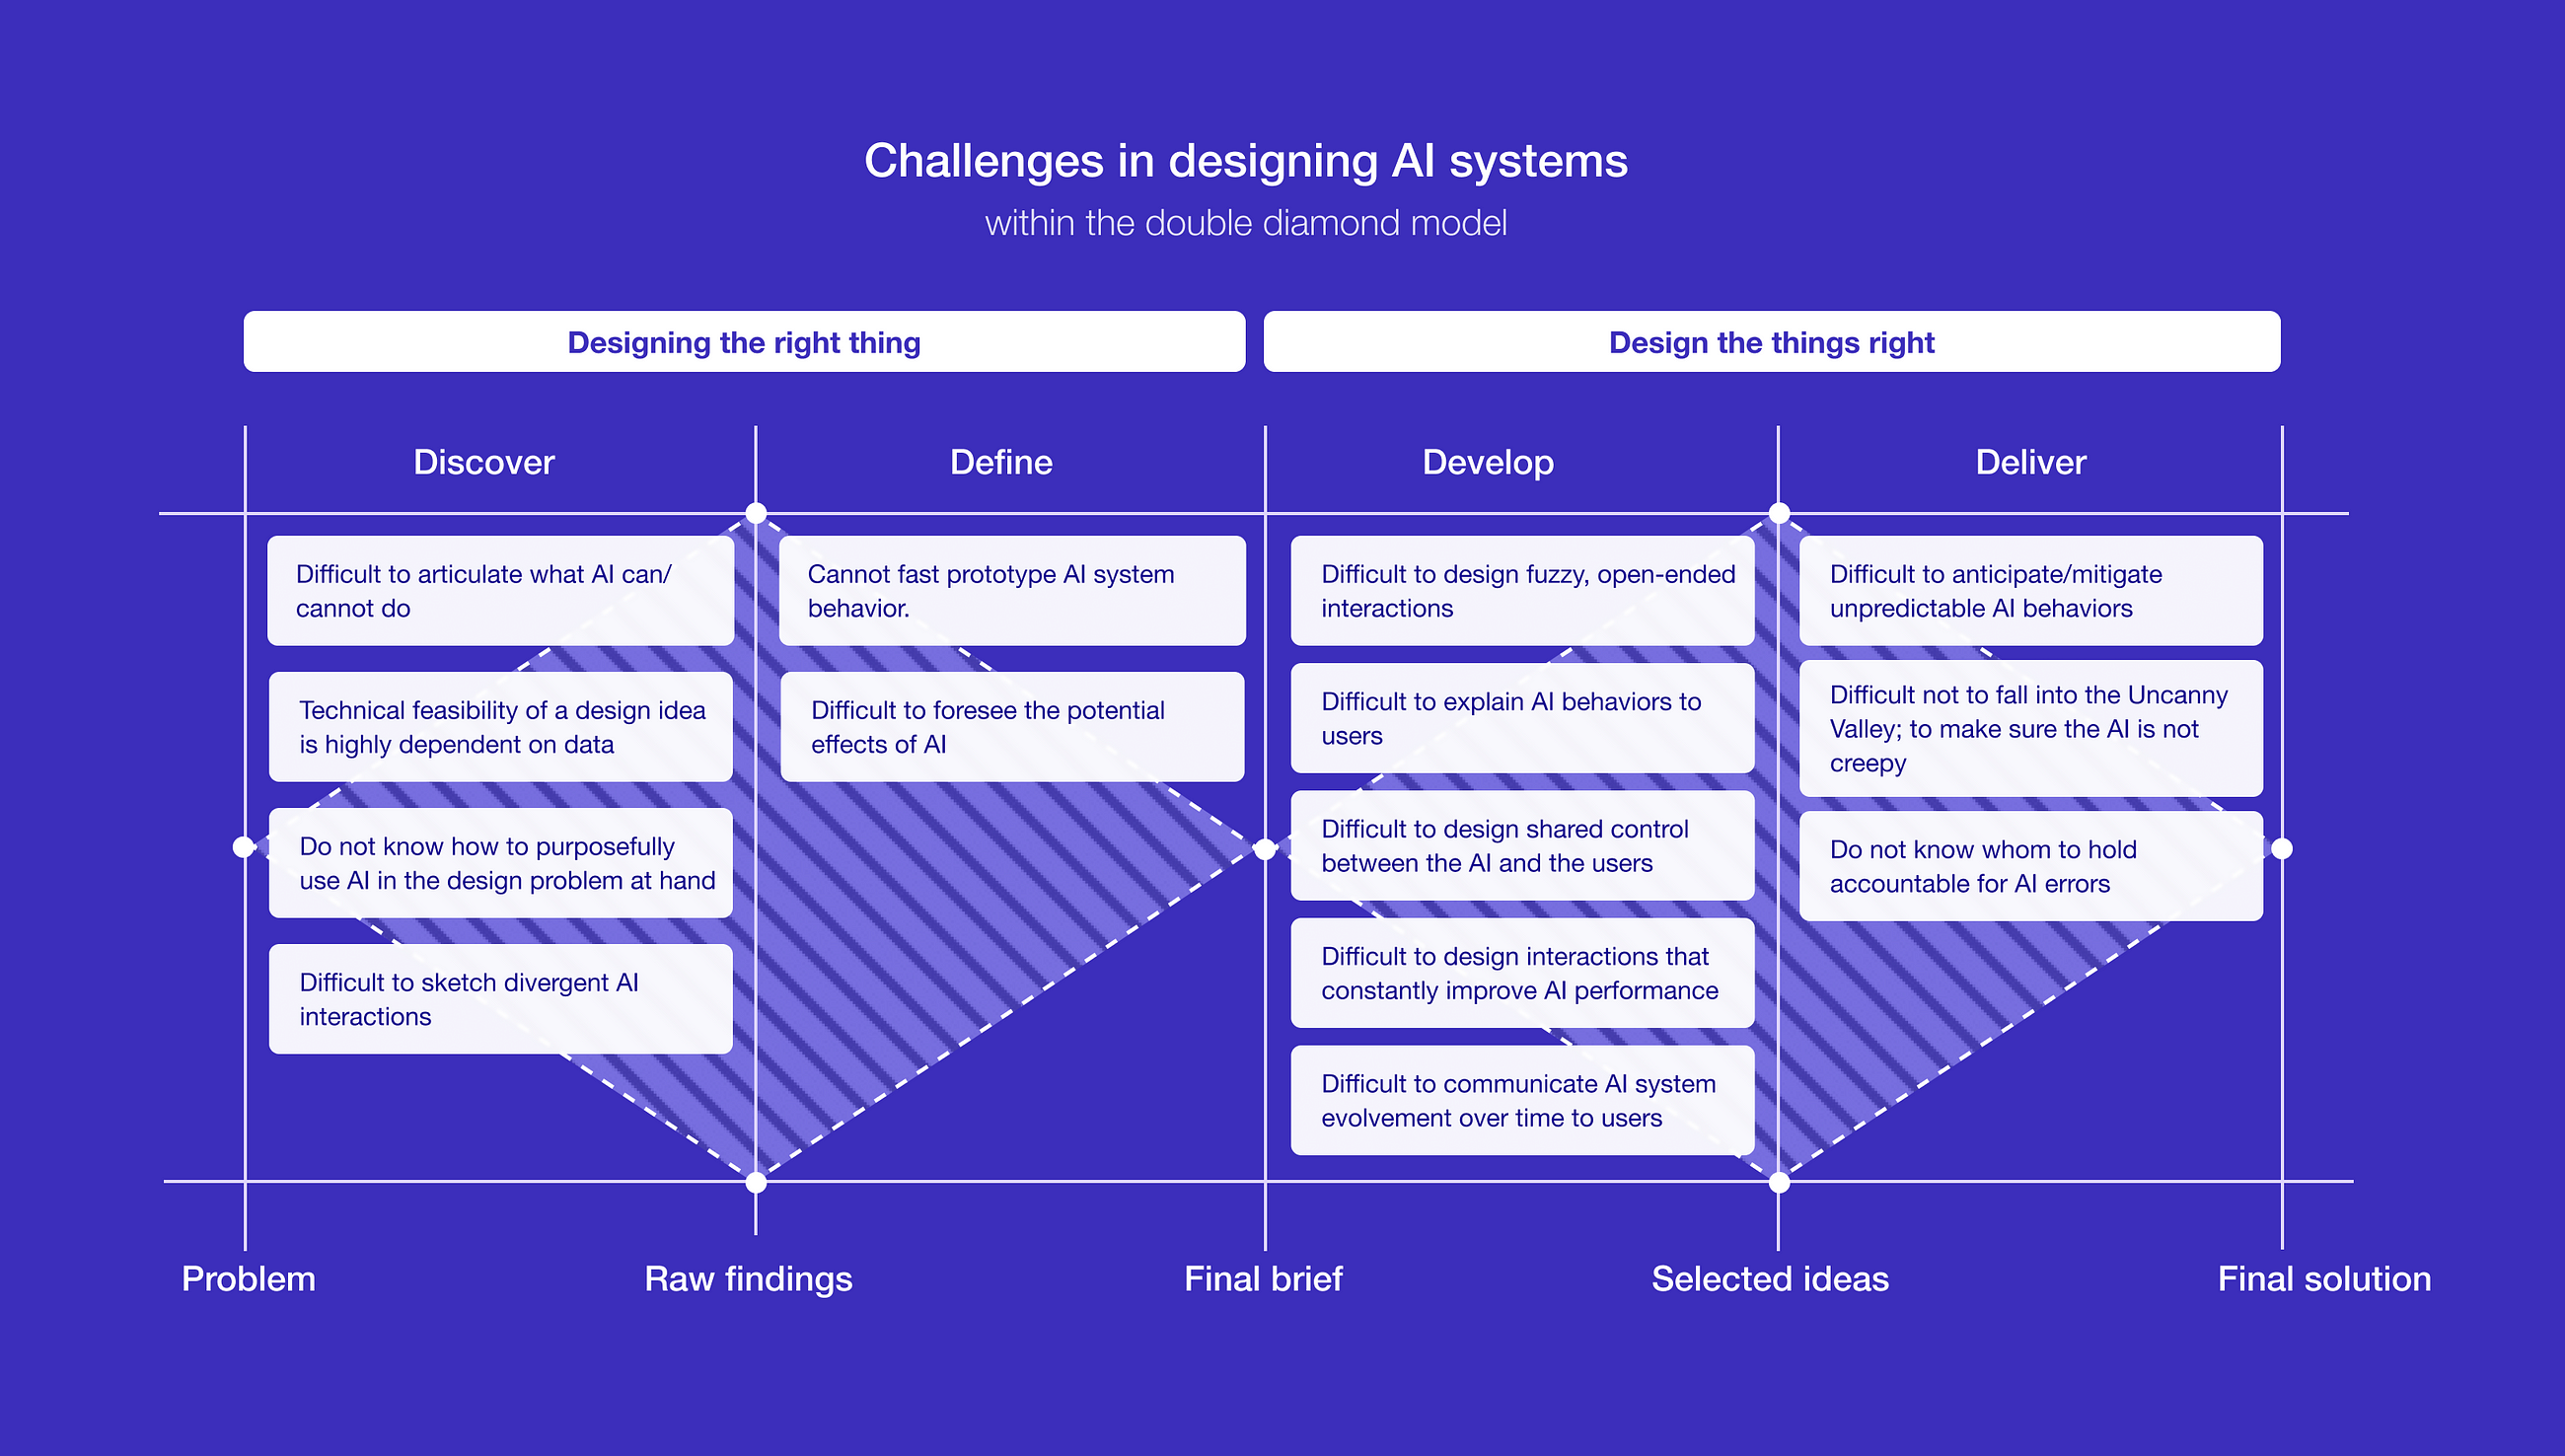 AI product design: Identifying skills gaps and how to close them